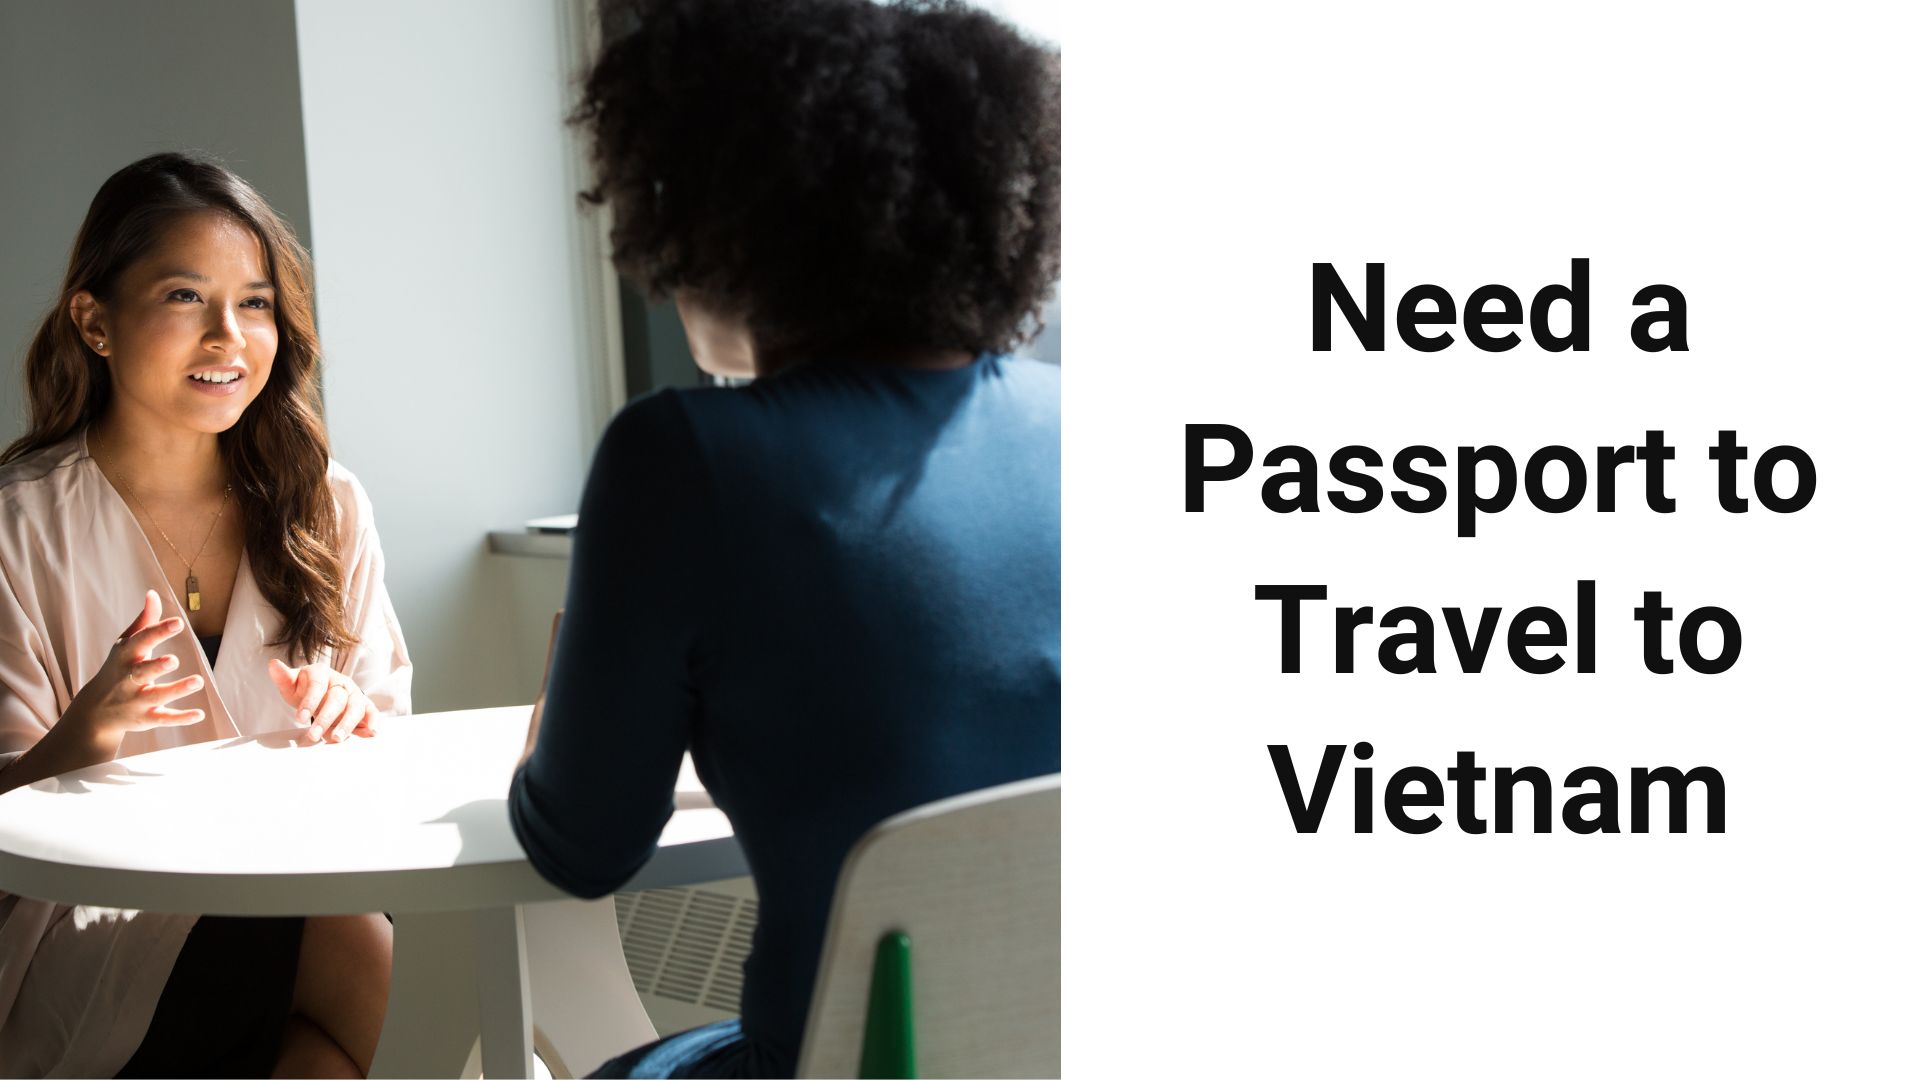 Do you Need a Passport to Travel to Vietnam?